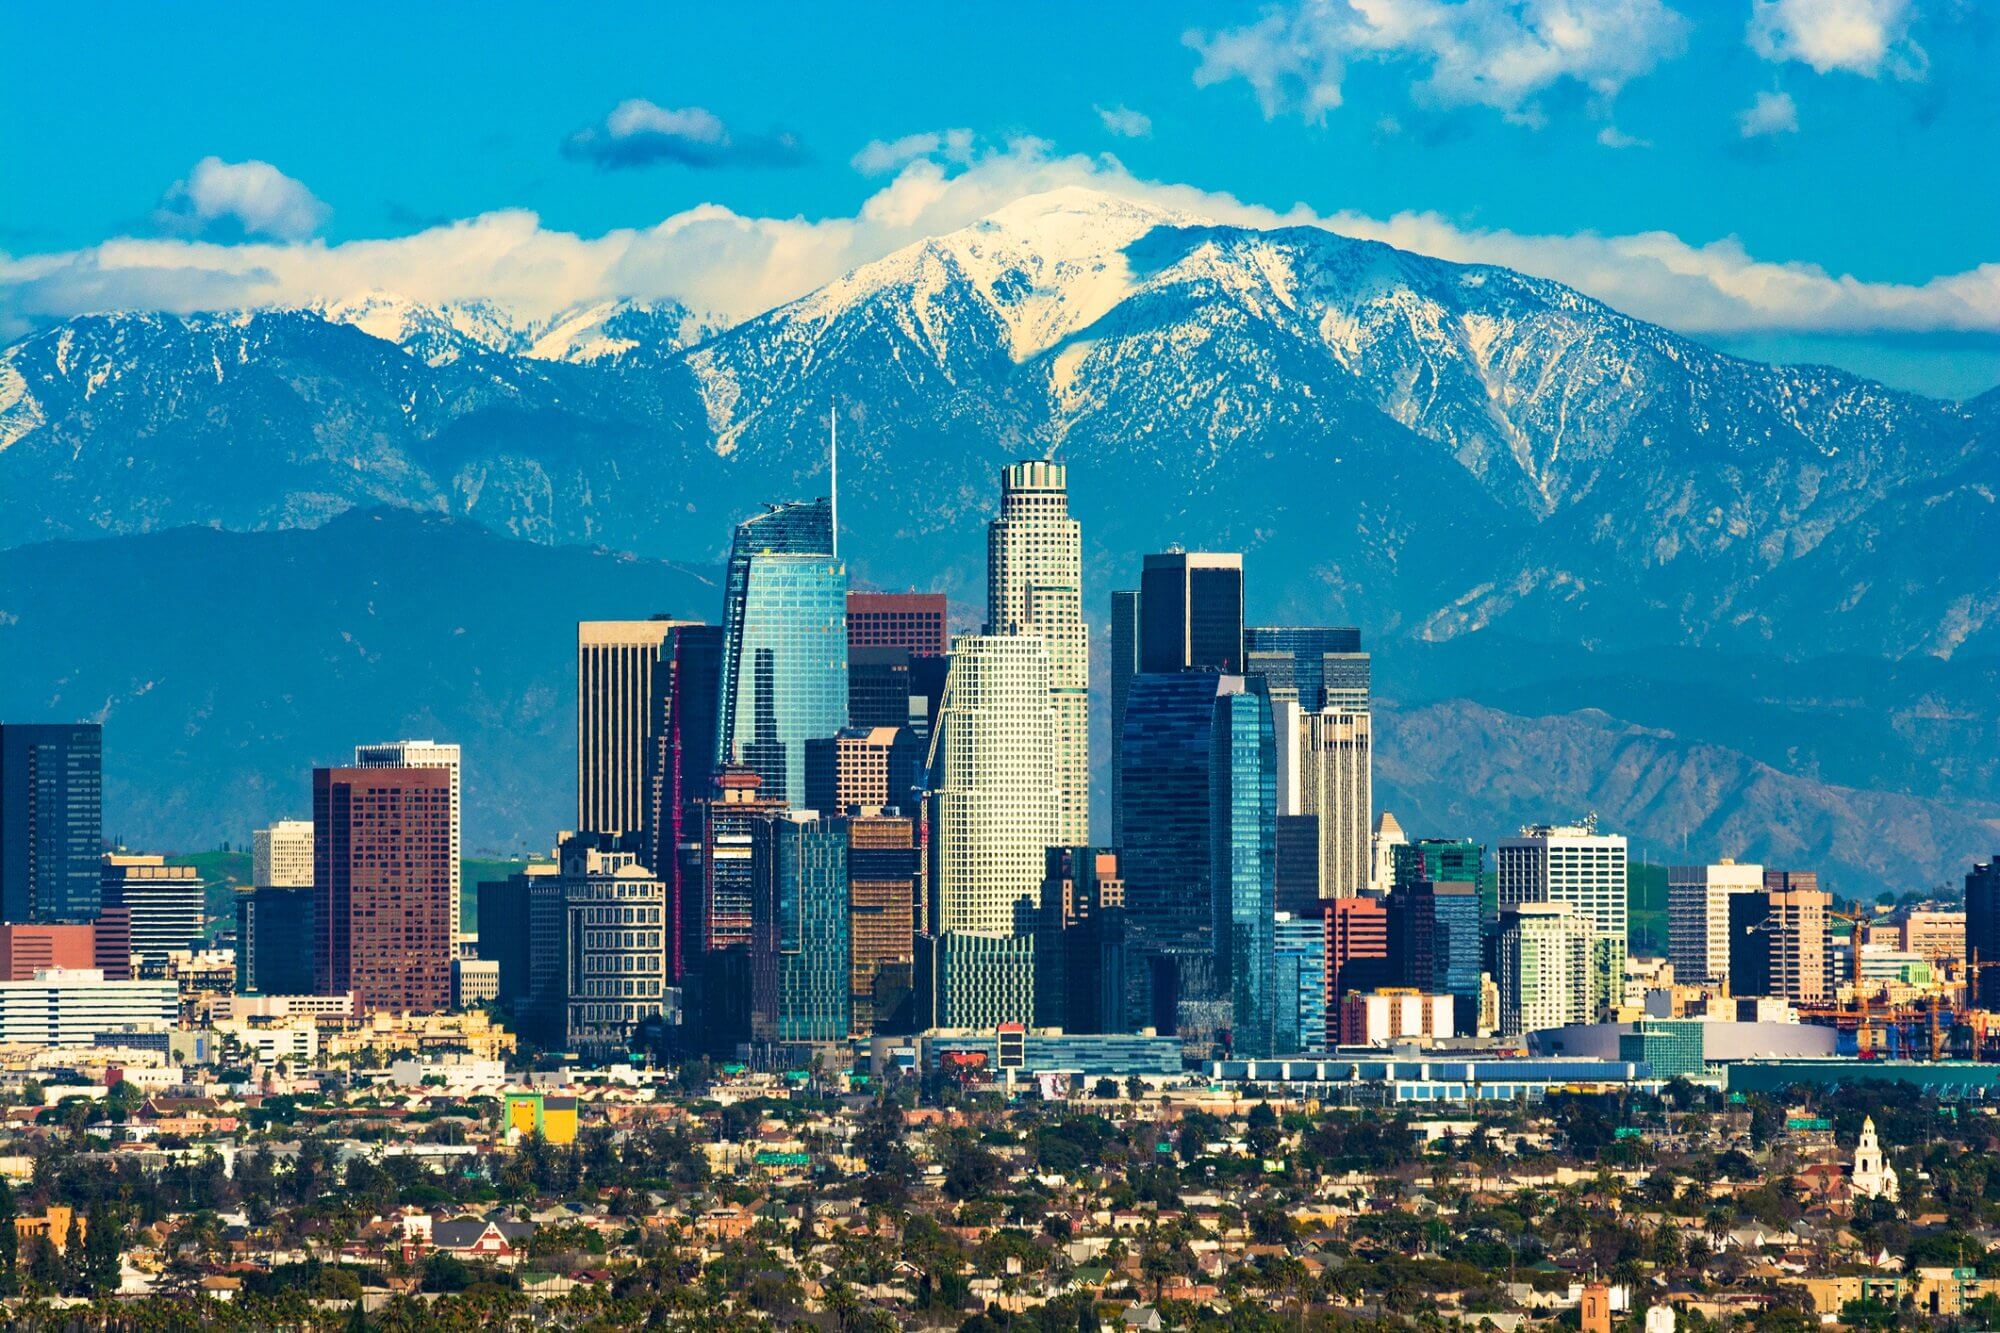 Los Angeles City Is Complete our mountains Our Hollywood our